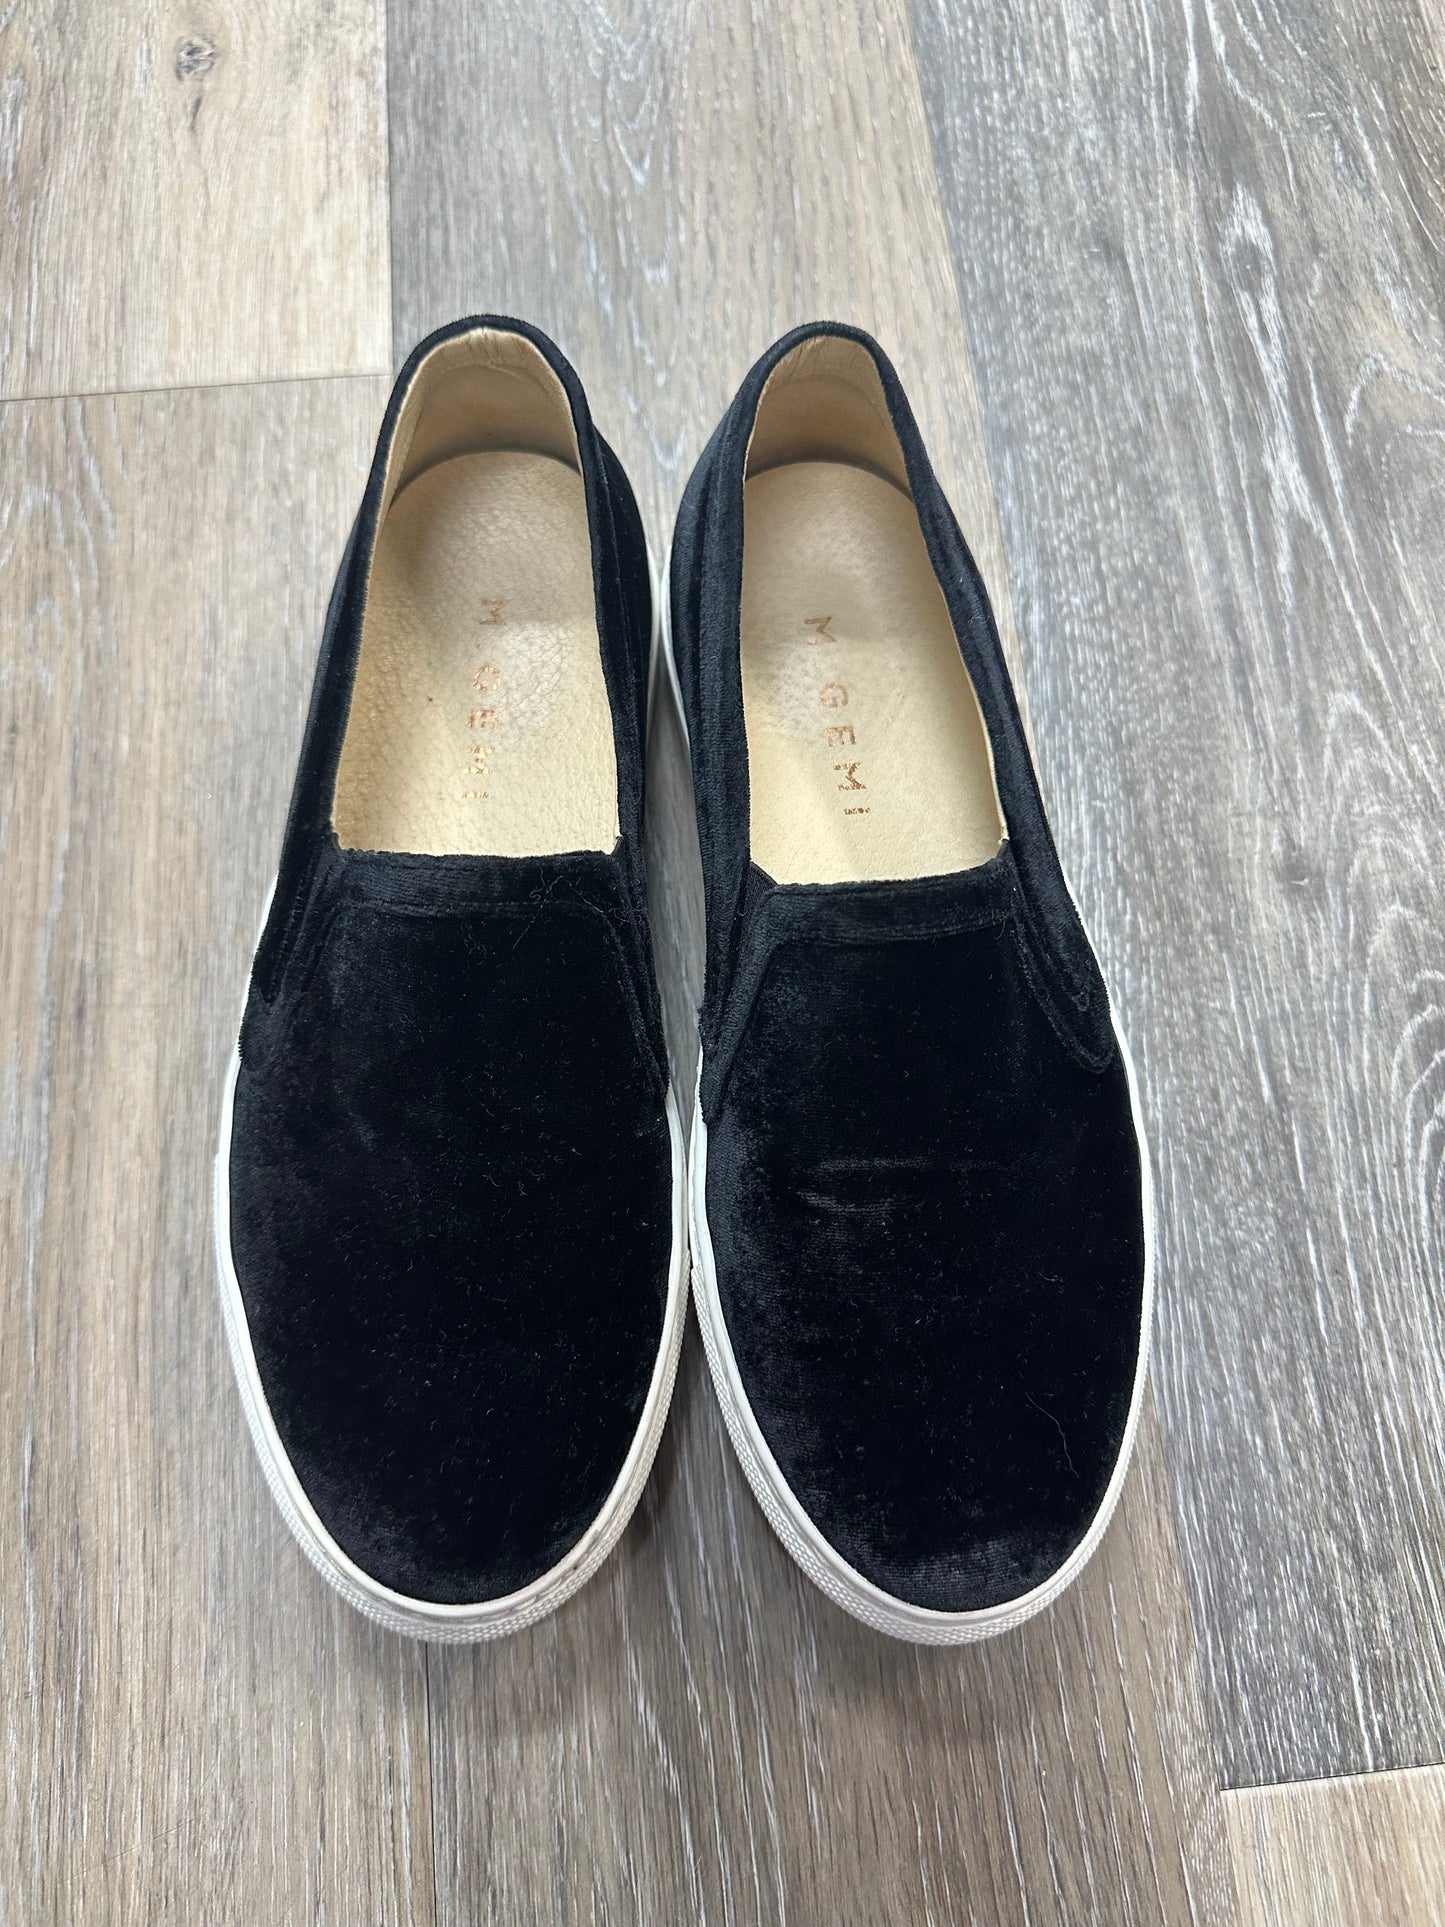 Shoes Flats By M. Gemi  Size: 6.5